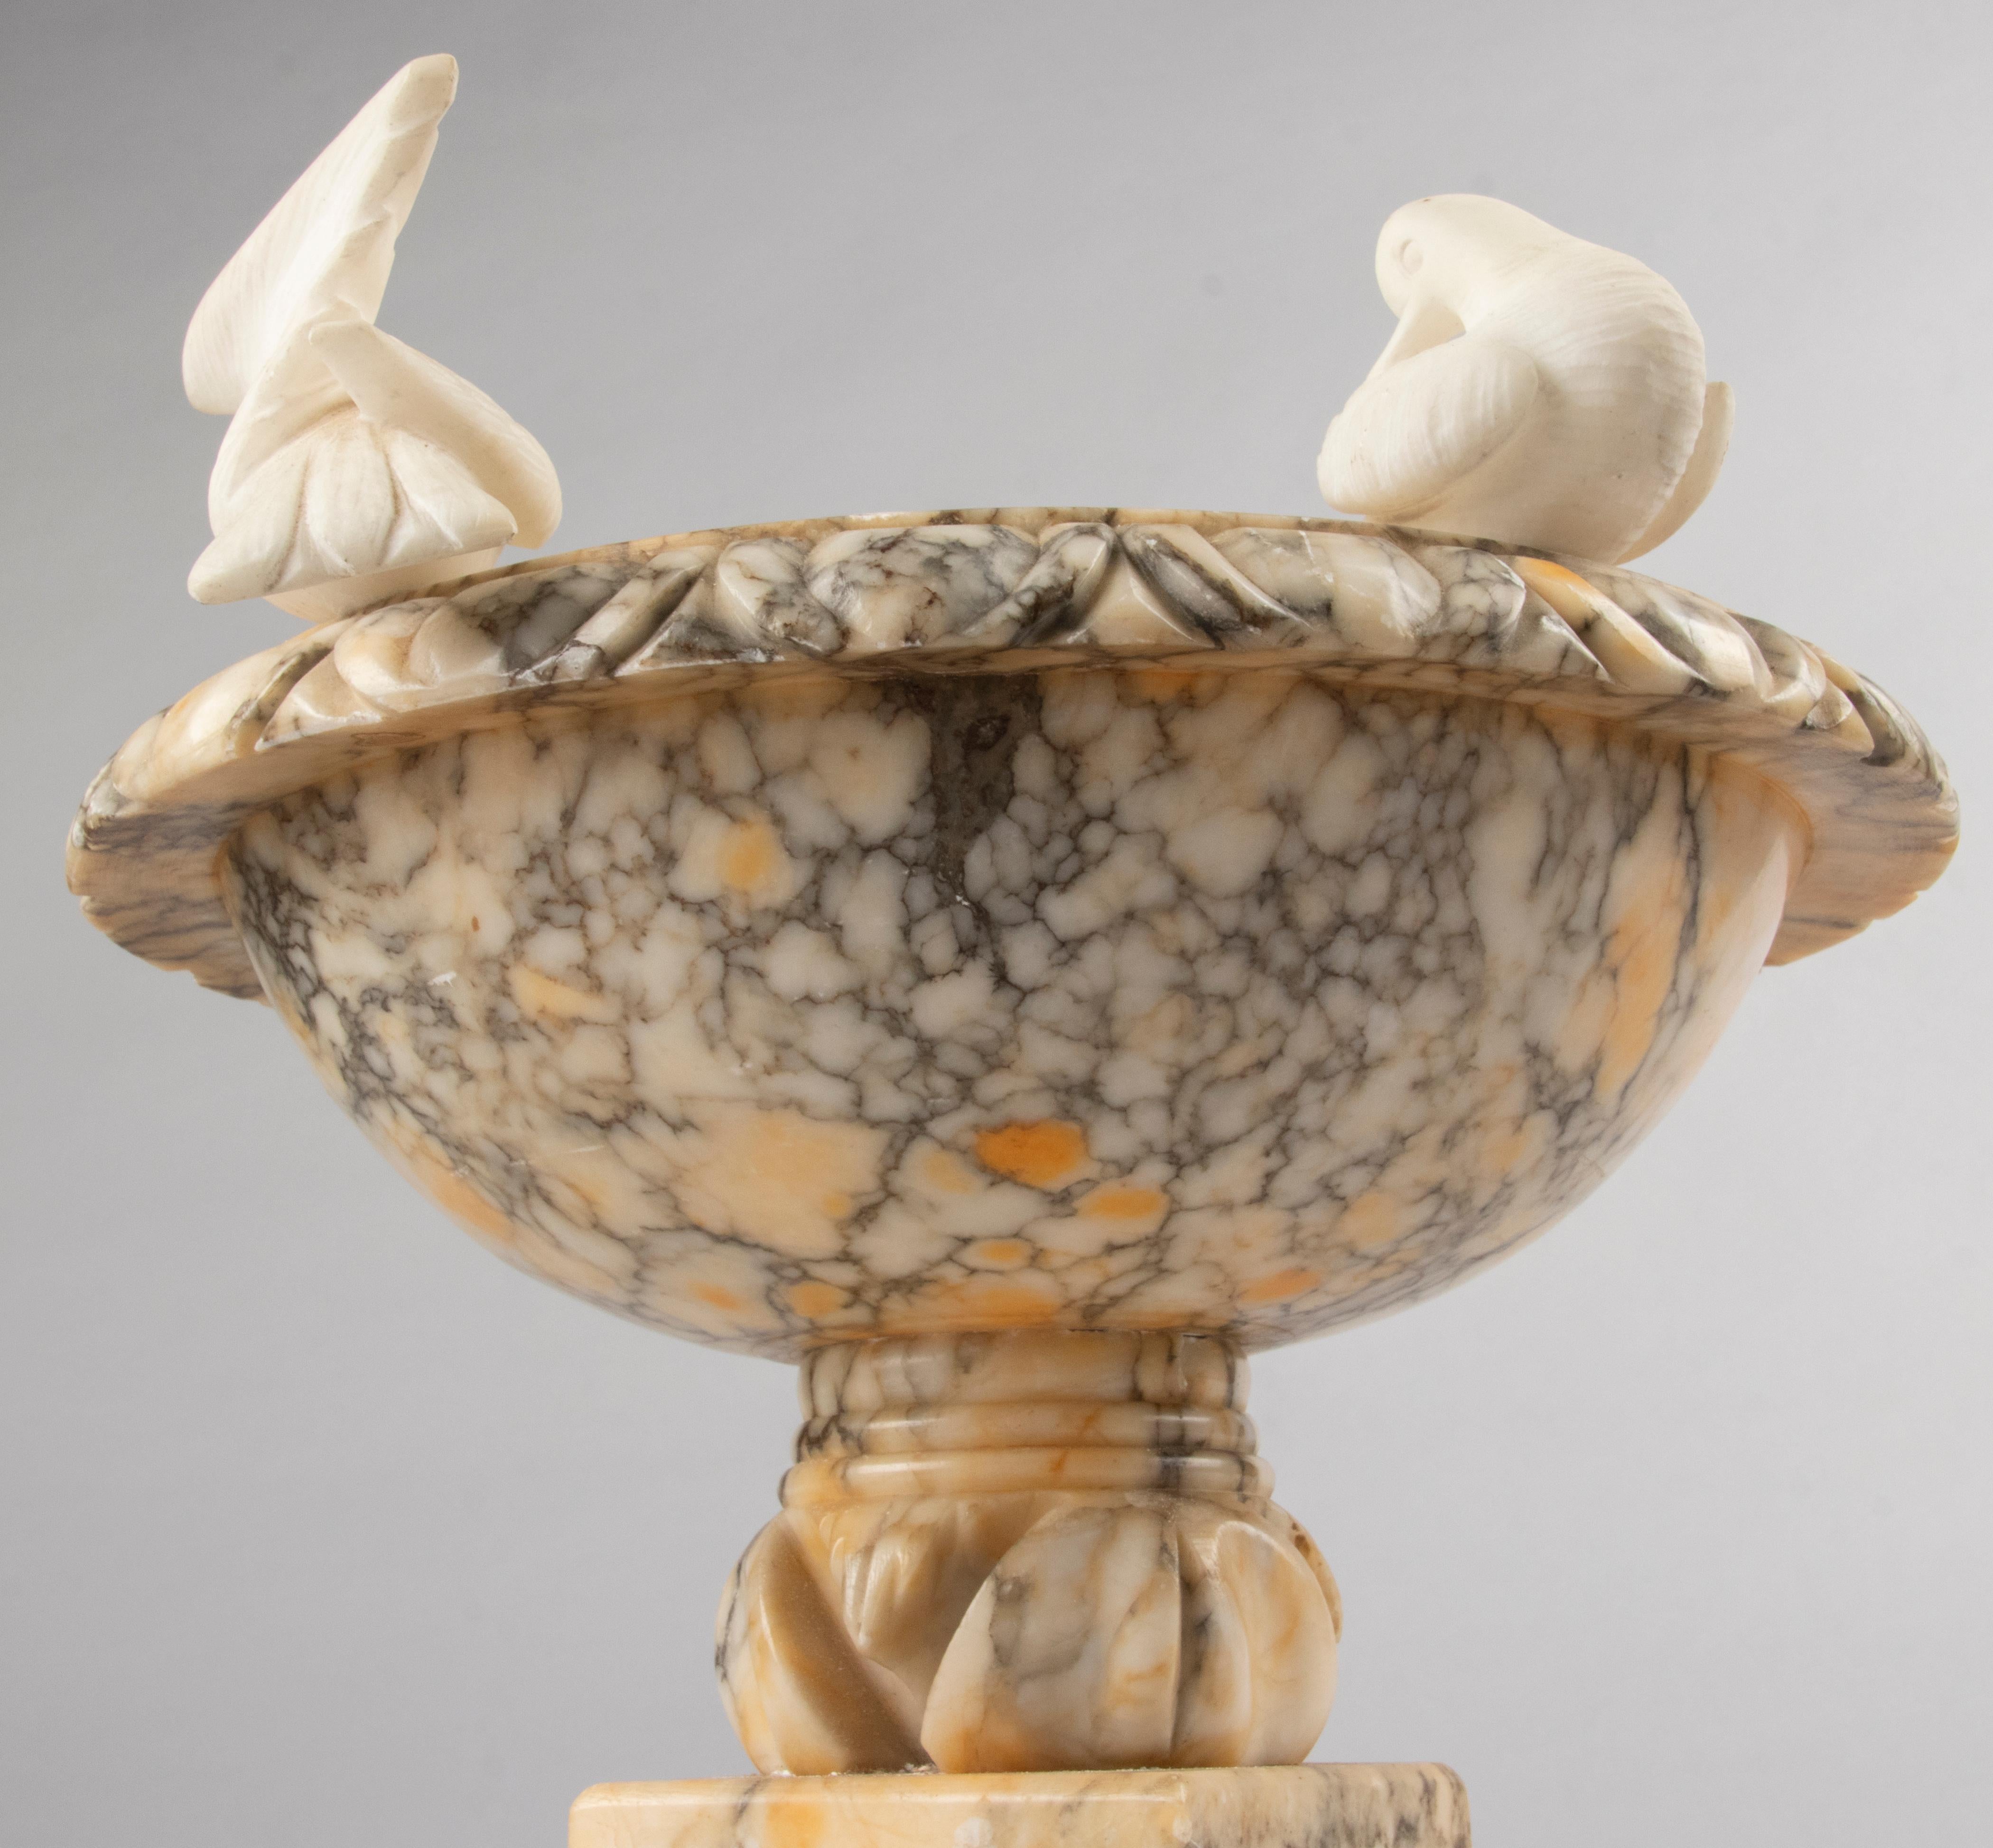 Hand-Carved Decorative Vintage Marble Bowl with Birds